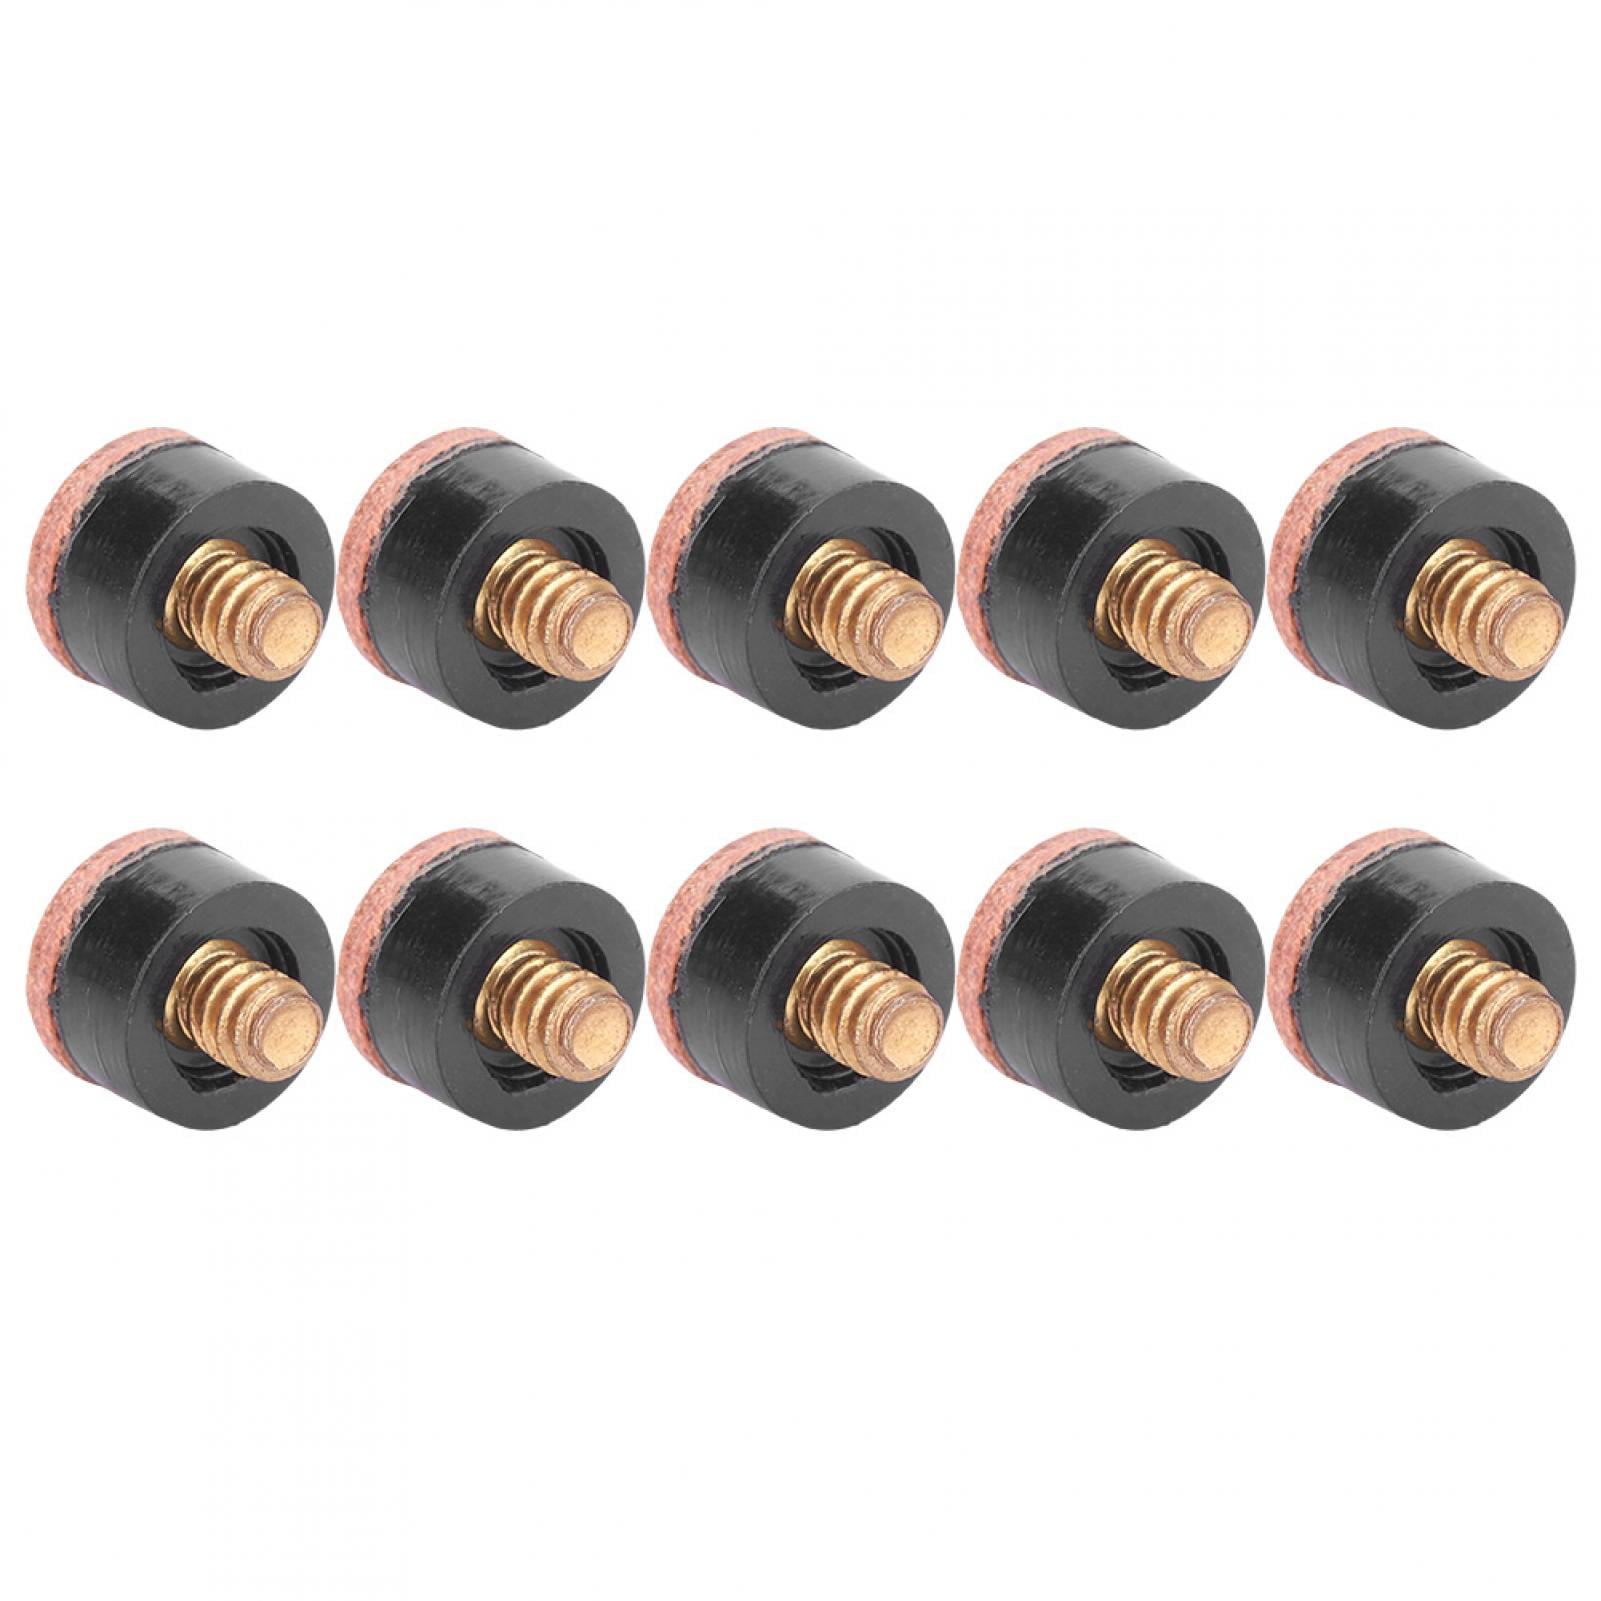 Details about   10pcs Billiards Brass Tip Snooker Copper Pool Ferrules Repair Tool Accessory 